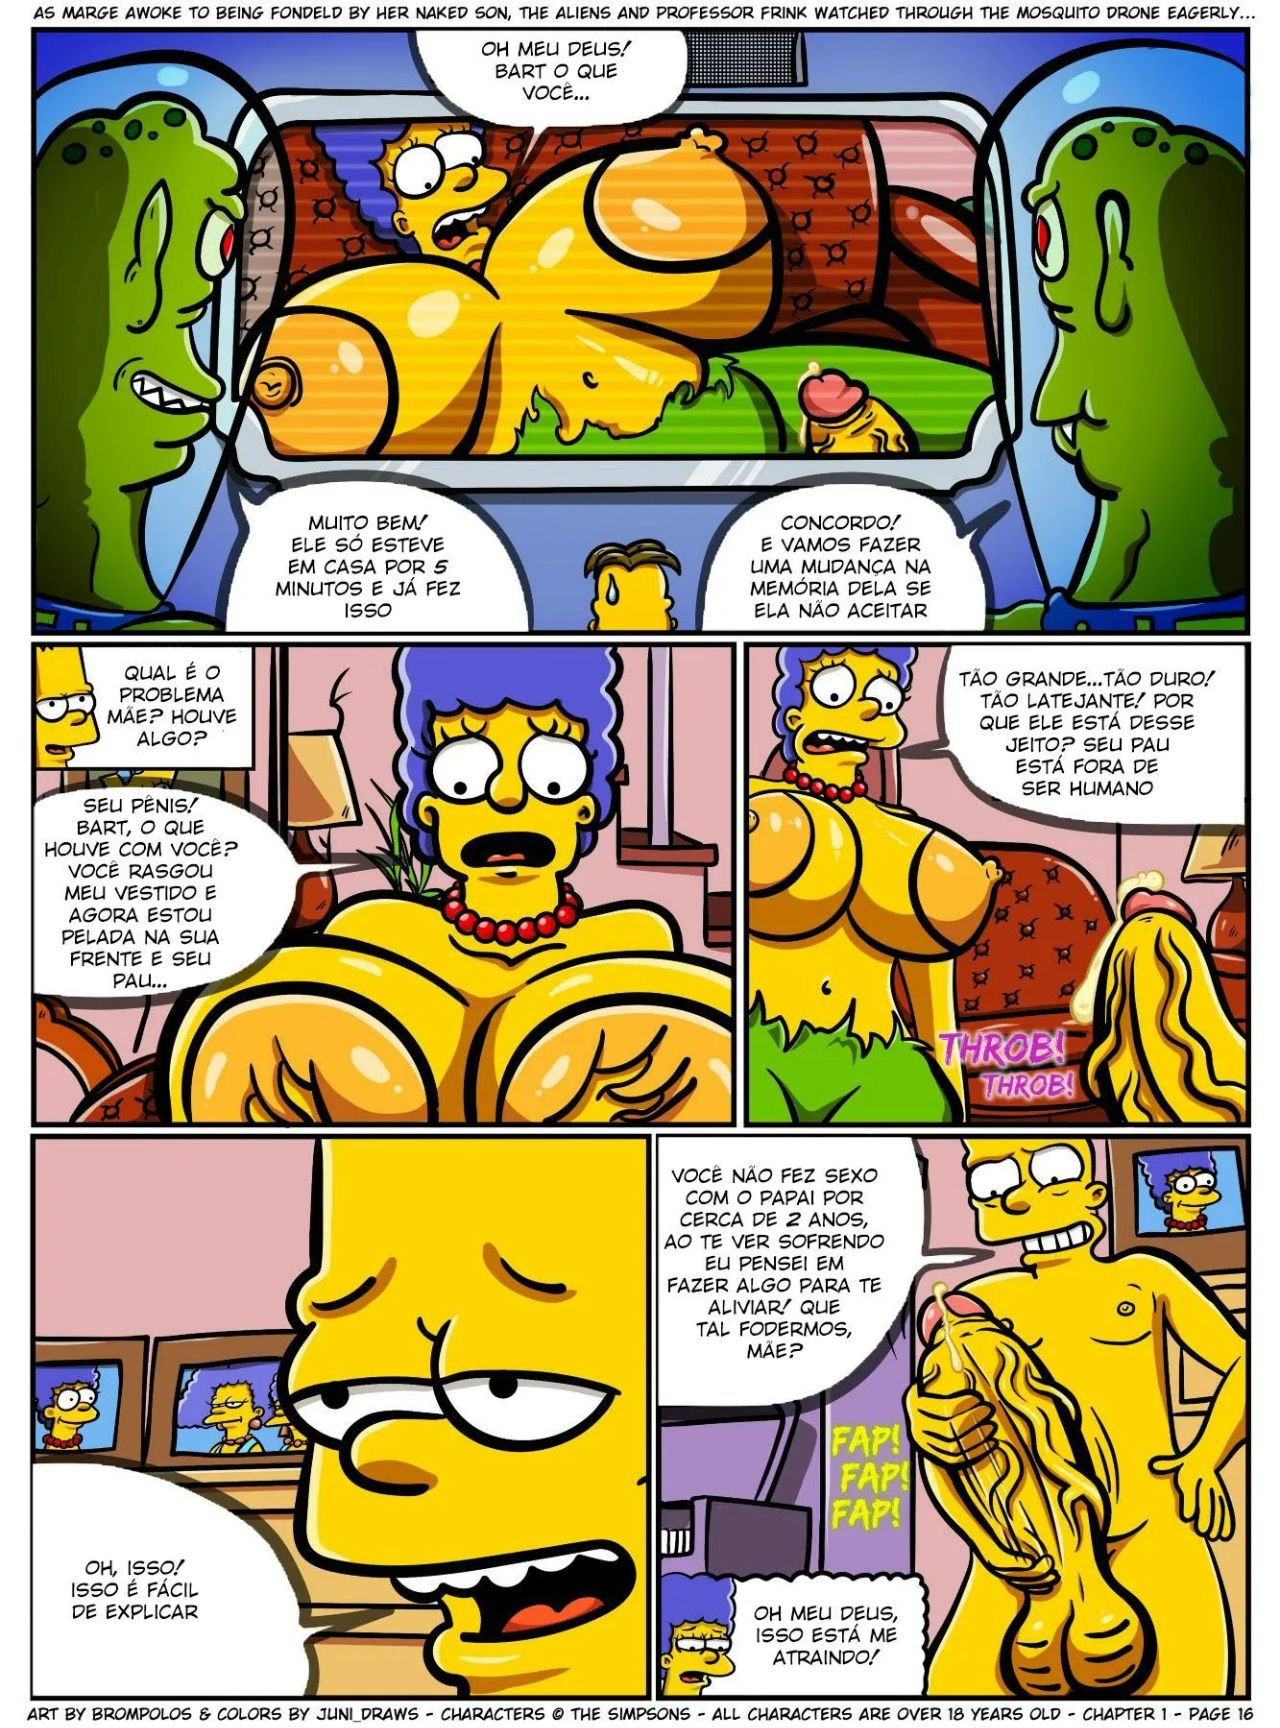 The Sexensteins (The Simpsons)